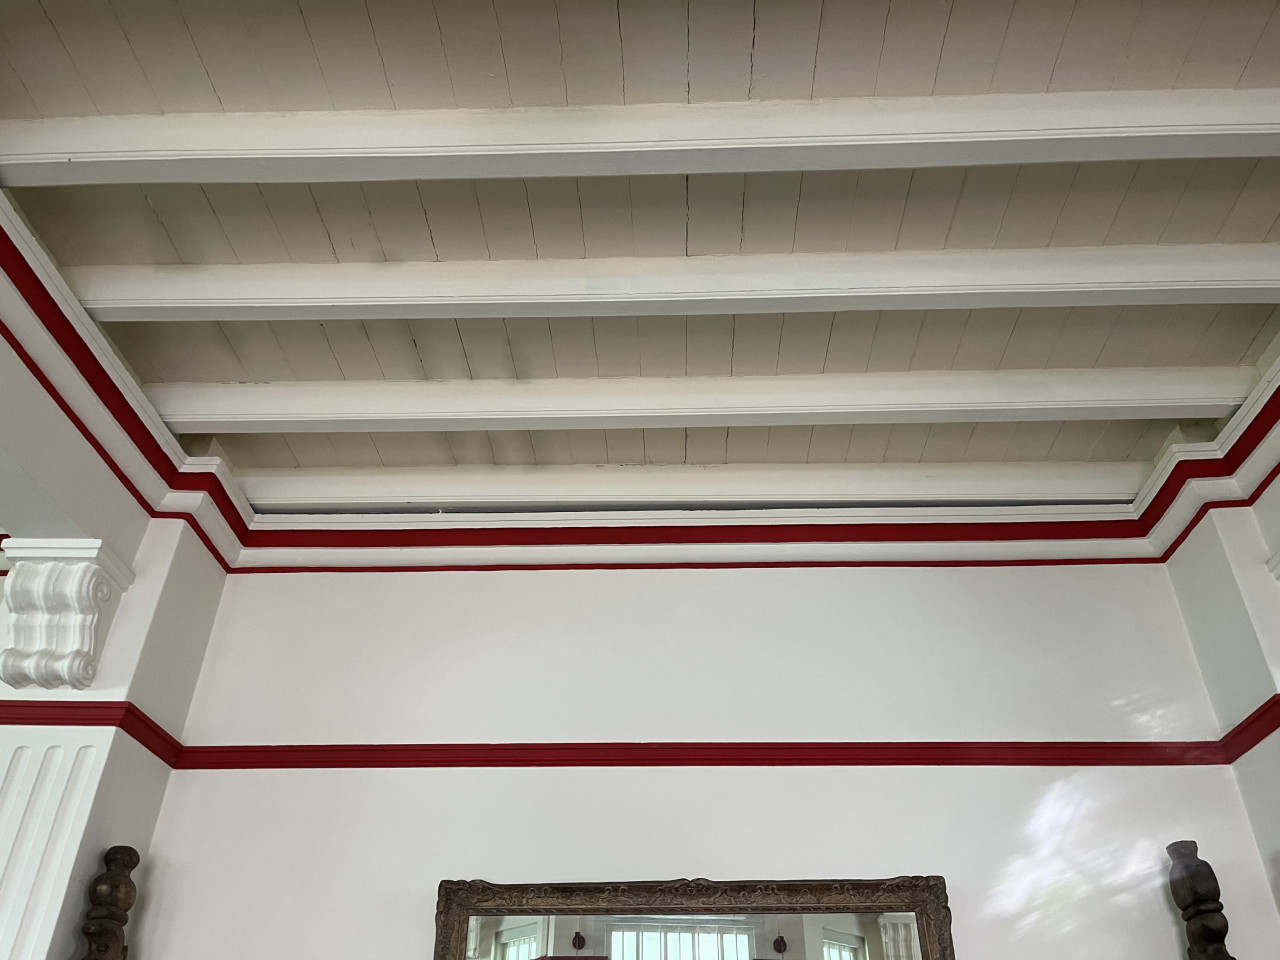 White ceilings with red lines, inspired by the Bomba building. – Rachel Yeoh pic